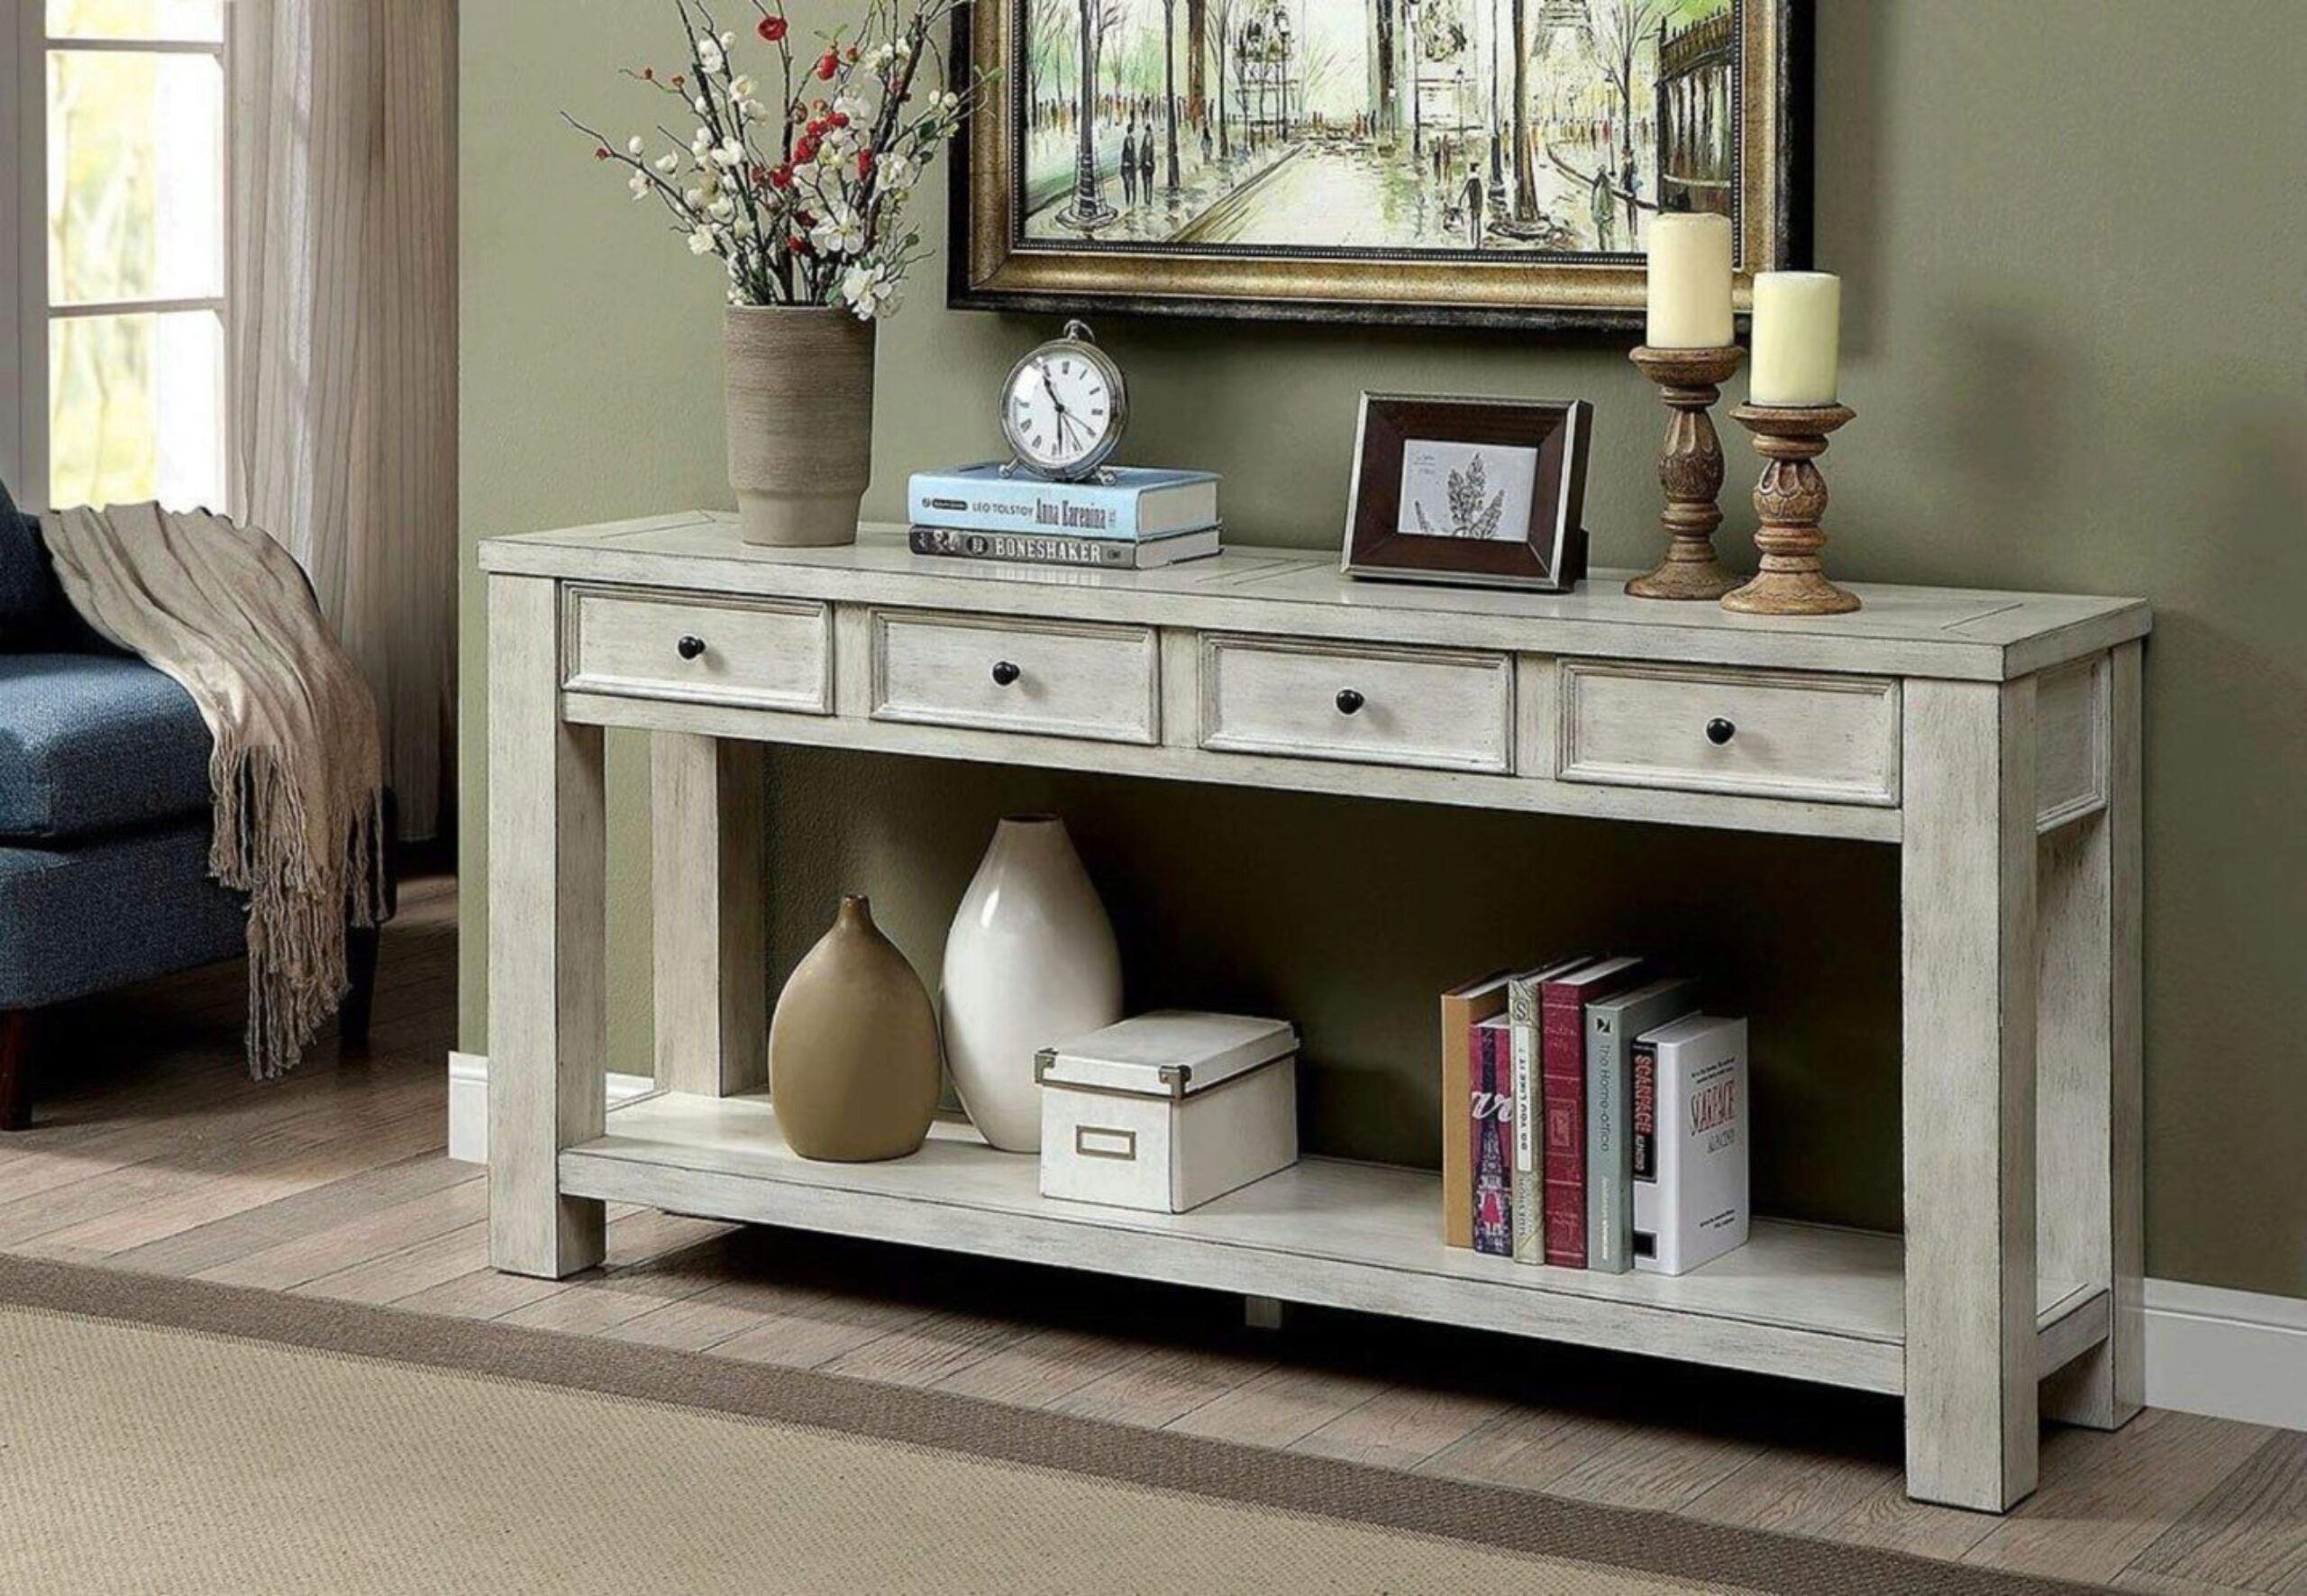 Sofa Table Antique White Rustic Solid Wood Storage Table Open Shelf Bottom Living Room 1 Piece Side Table.